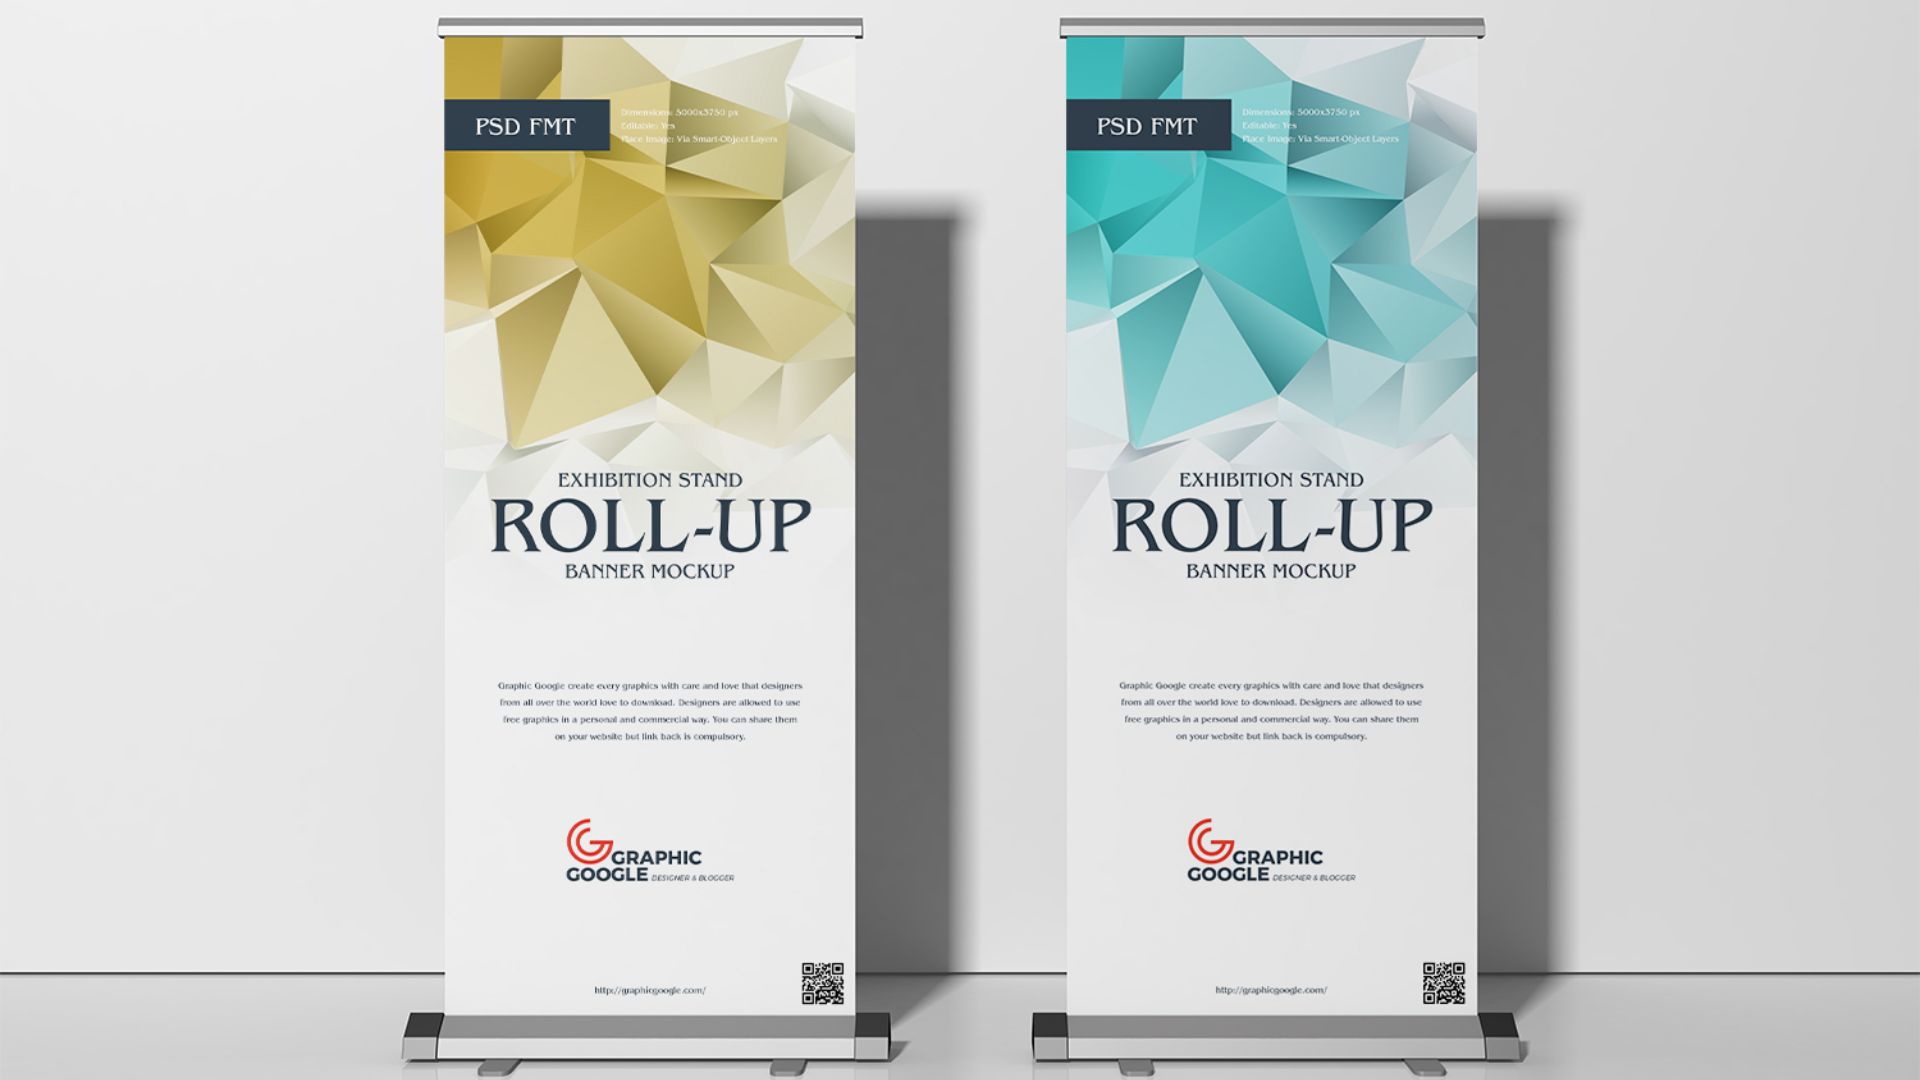 What Makes Roll Up Banners Ideal for Mobile Marketing